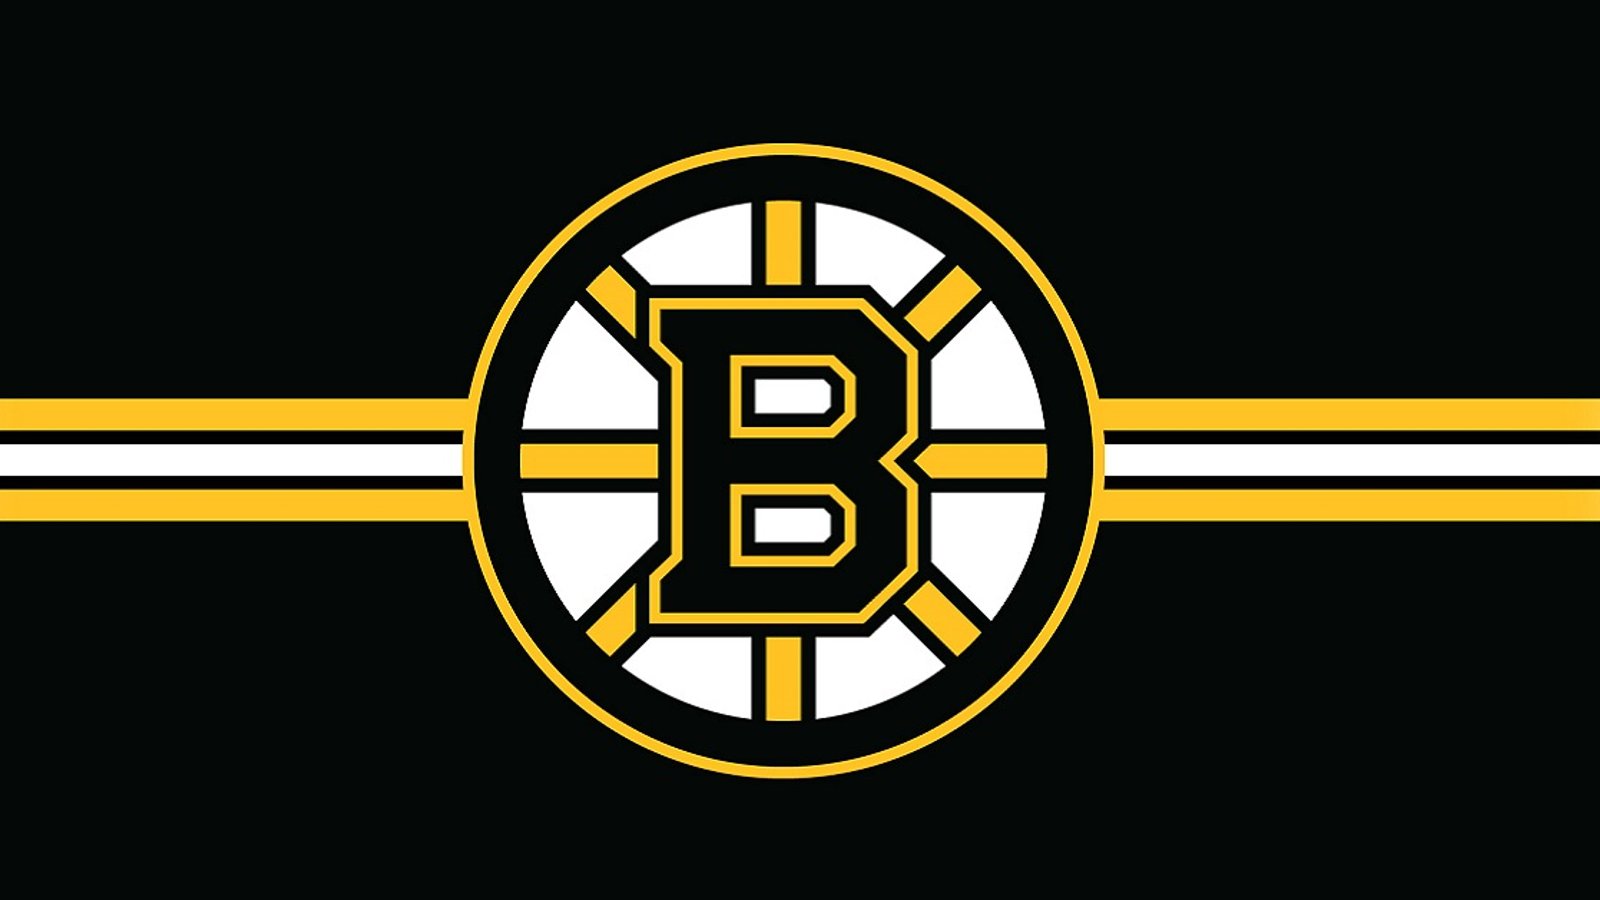 Former first round pick hoping to make an NHL comeback with the Bruins!